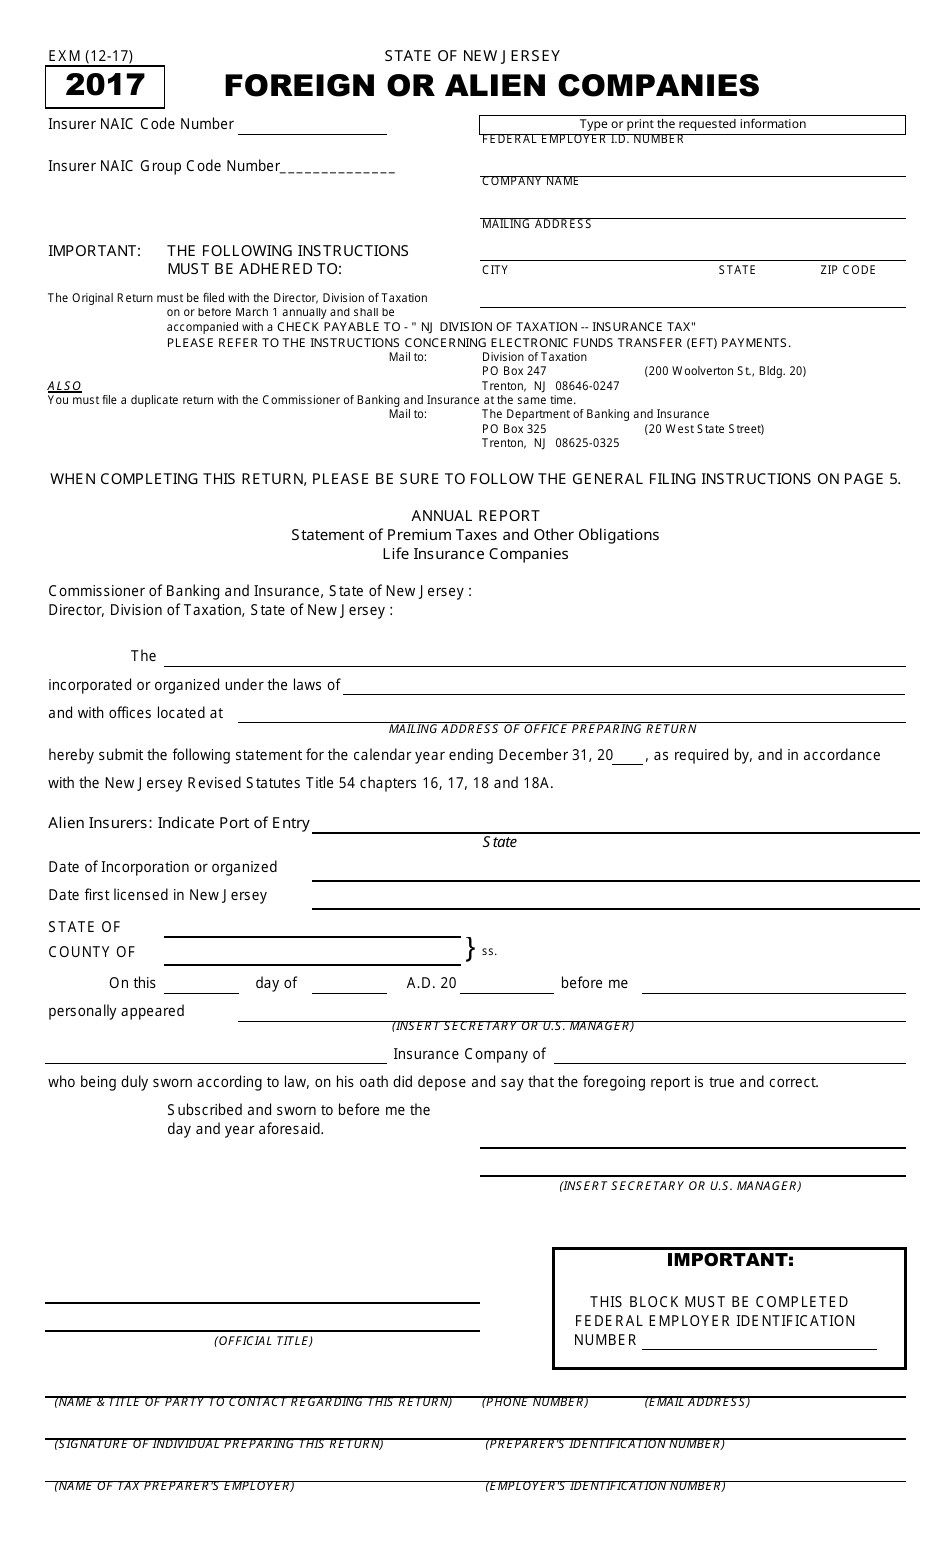 Form EXM Foreign or Alien Companies - New Jersey, Page 1